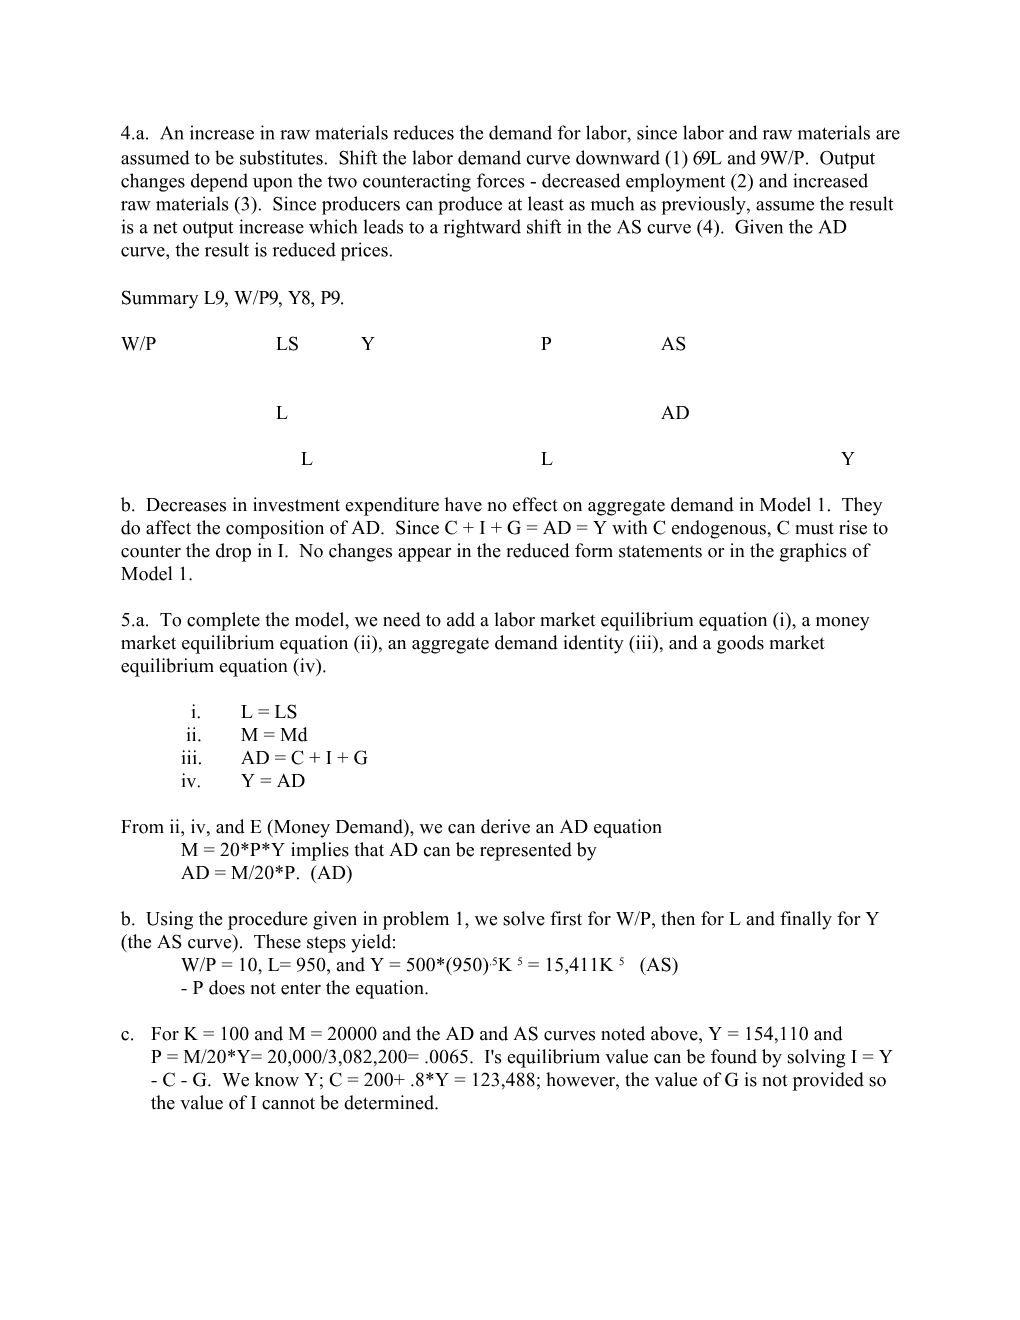 1.A.To Determine the Value for L, Jointly Solve (1) - (3)